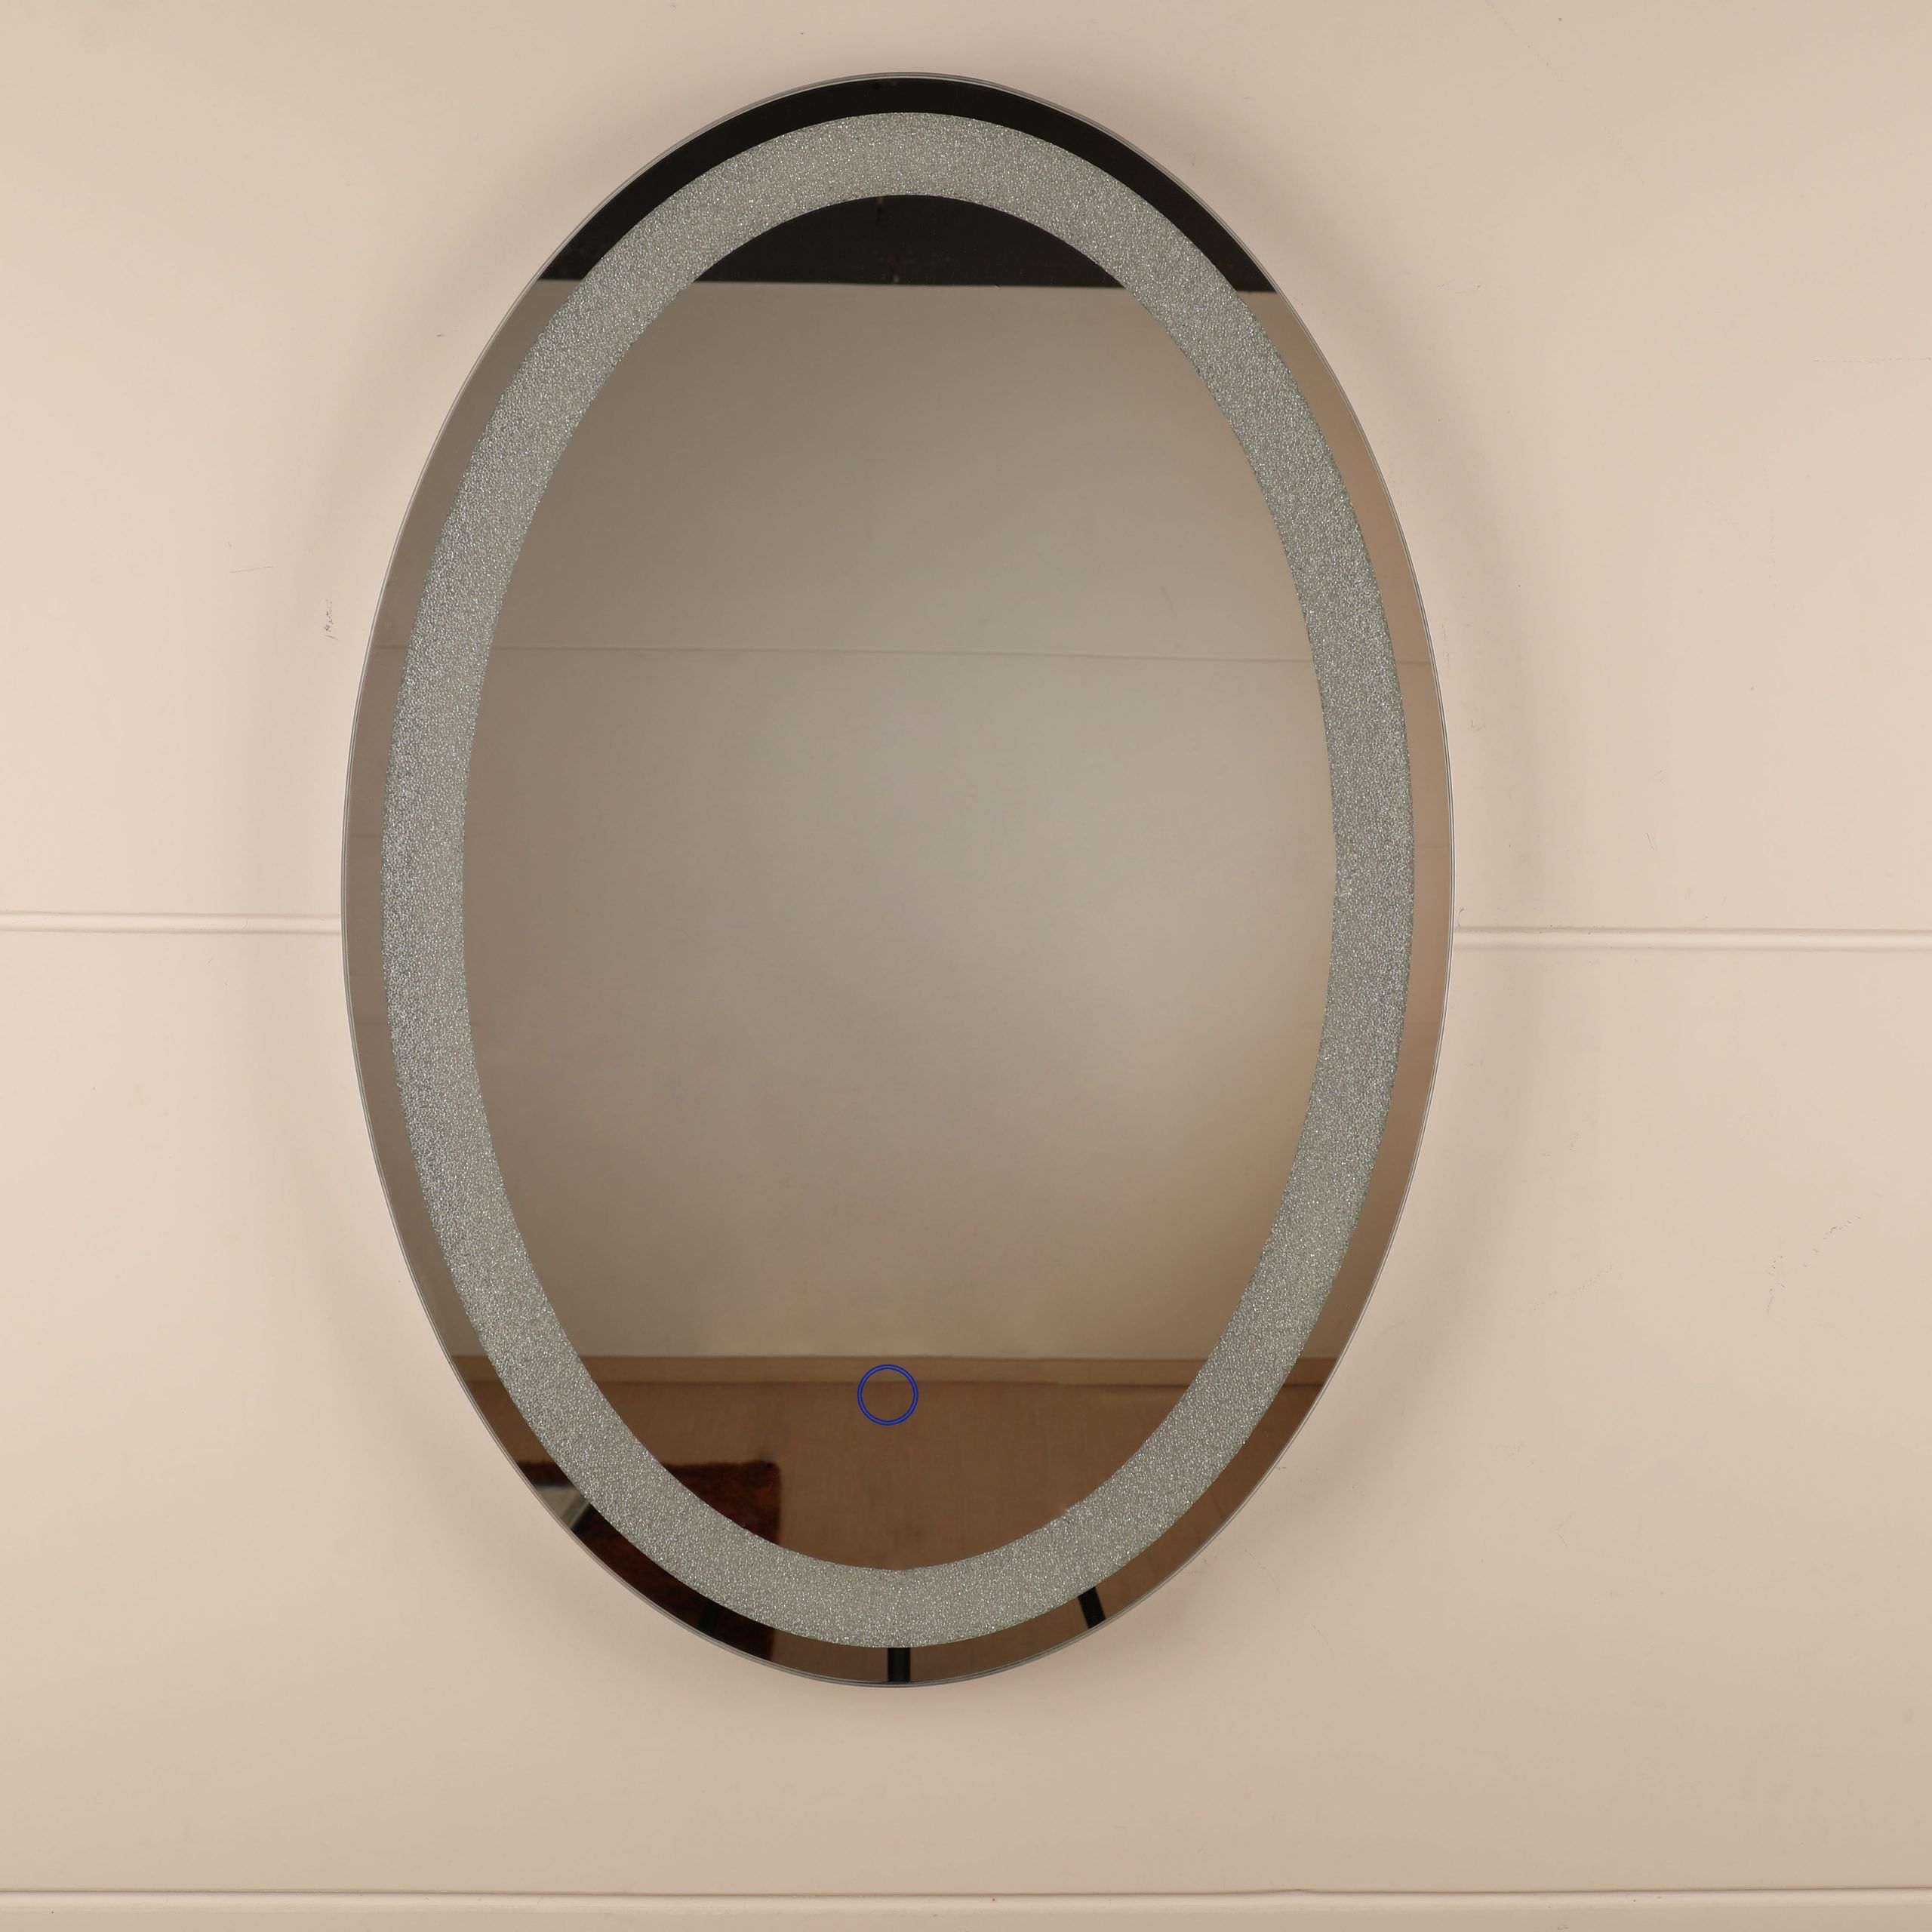 Ceiling Hung Oval Mirrors In Newest Round Led Wall Mounted Mirror,oval Led Wall Mounted Mirror For Sale (View 1 of 15)